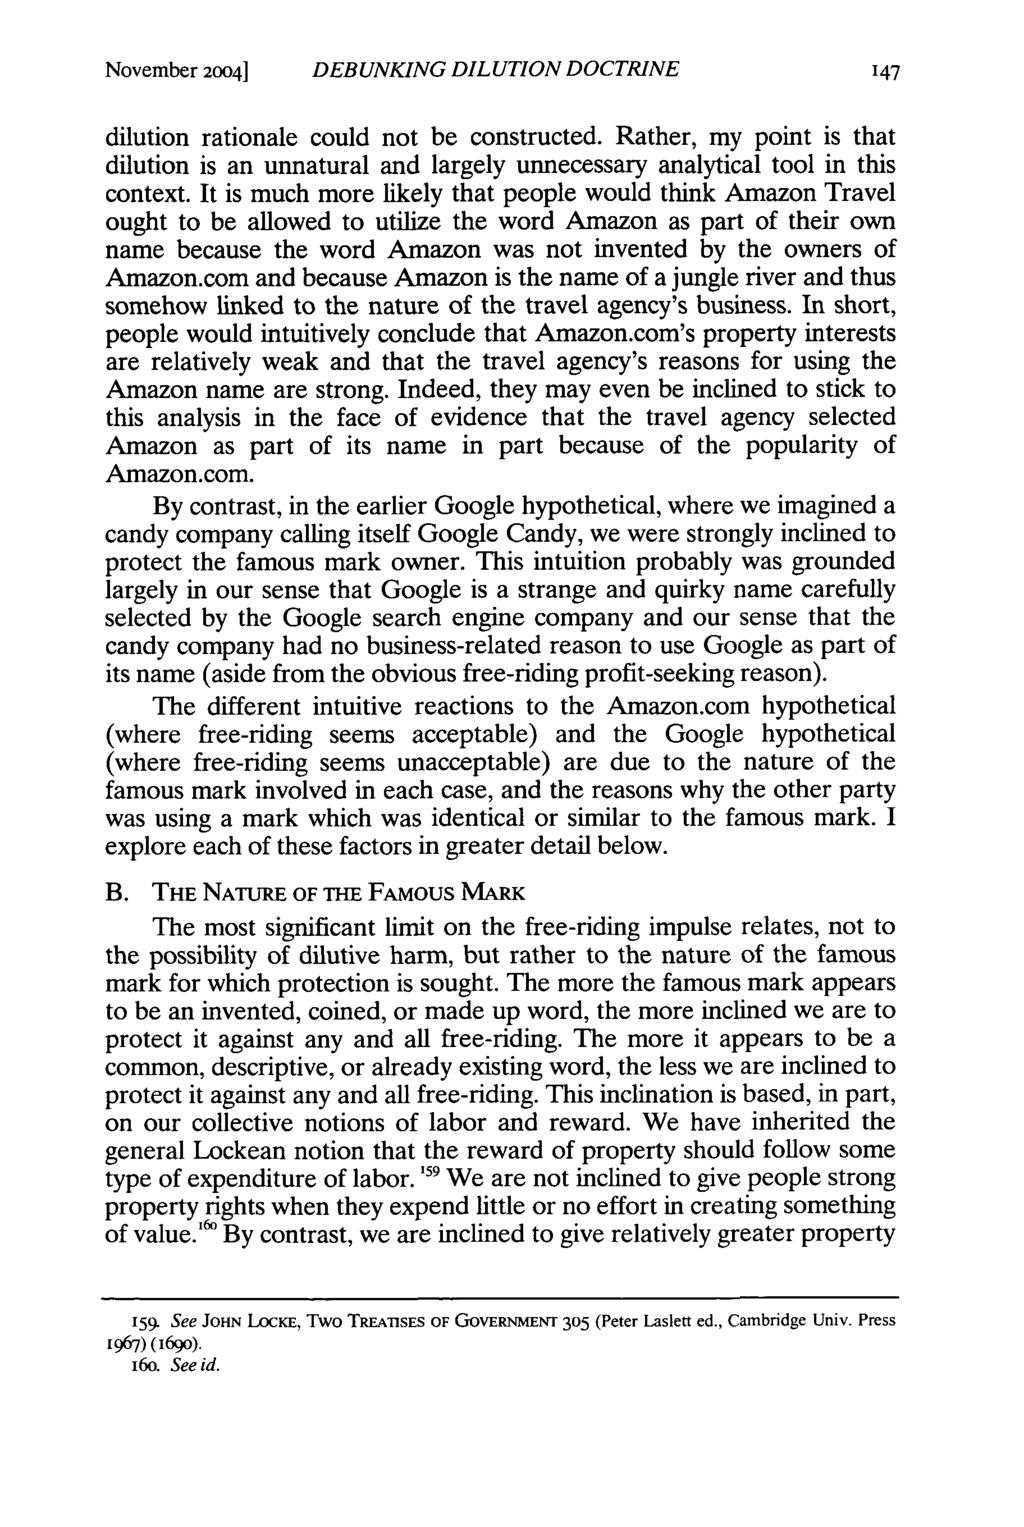 November 2004] DEBUNKING DILUTION DOCTRINE dilution rationale could not be constructed. Rather, my point is that dilution is an unnatural and largely unnecessary analytical tool in this context.